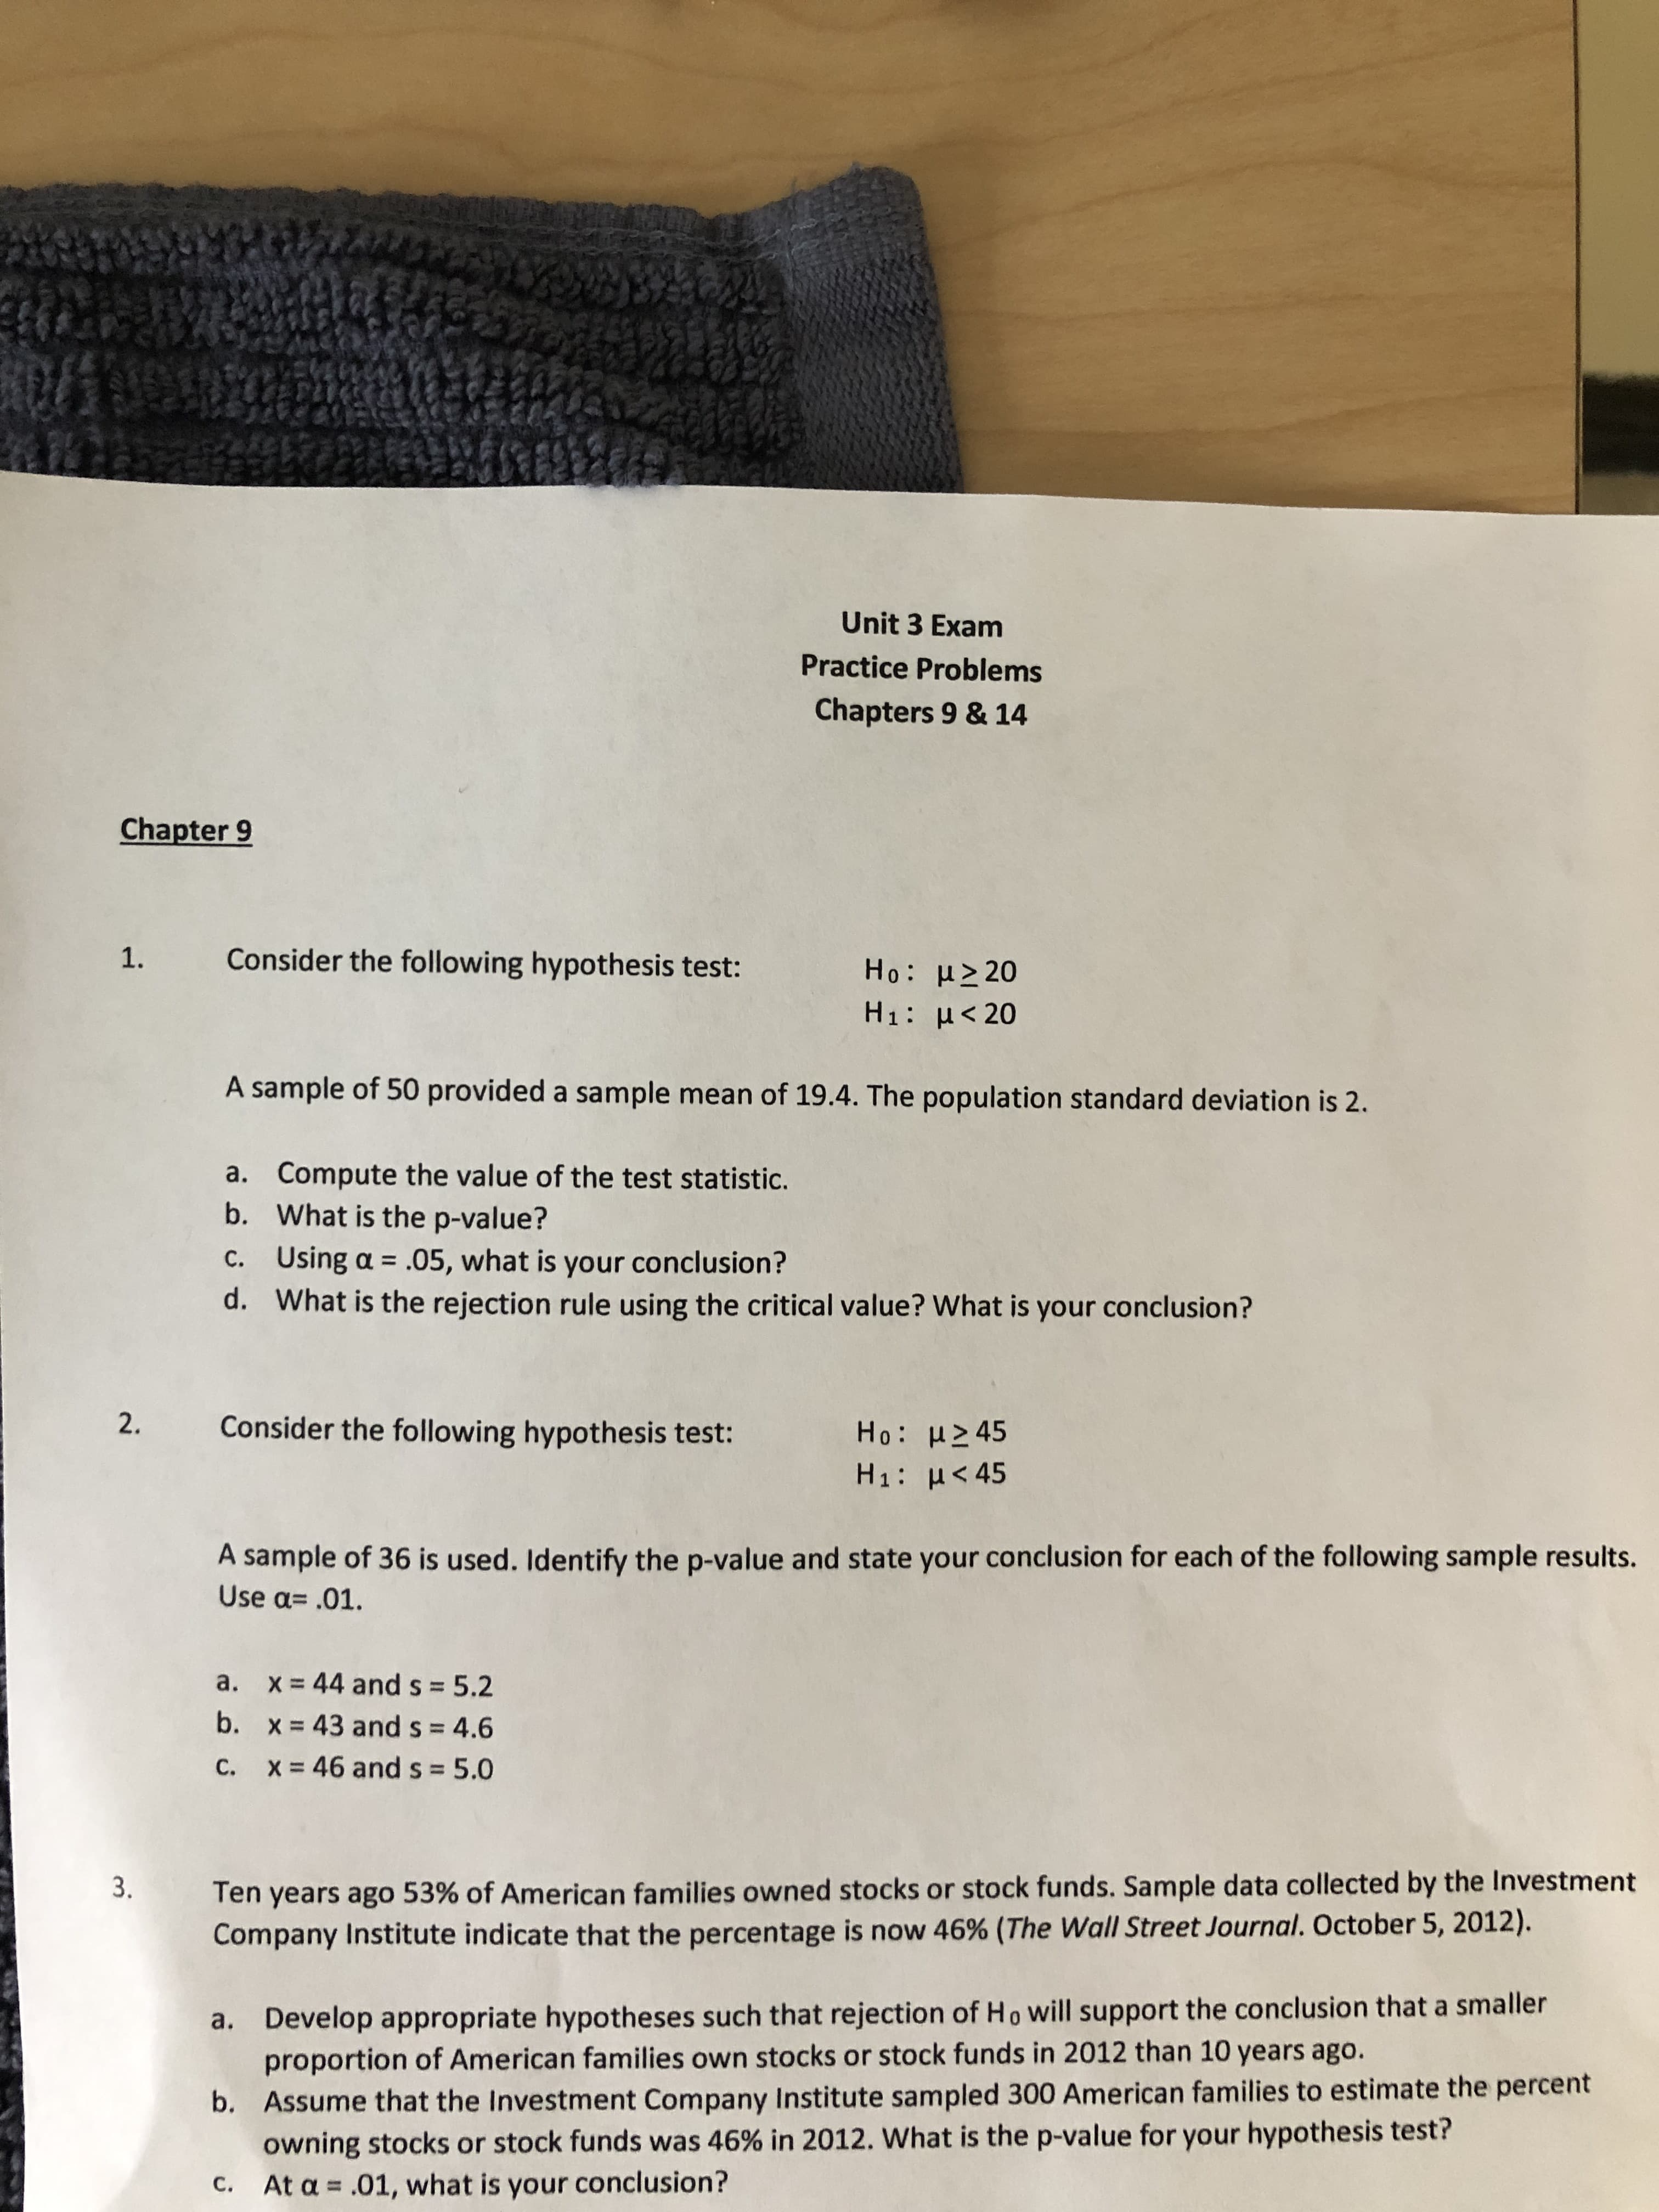 VEC
Unit 3 Exam
Practice Problems
Chapters 9 & 14
Chapter 9
1
Consider the following hypothesis test:
Ho: μ>20
H1: H<20
A sample of 50 provided a sample mean of 19.4. The population standard deviation is 2
Compute the value of the test statistic.
What is the p-value?
a.
b.
Using a .05, what is your conclusion?
What is the rejection rule using the critical value? What is your conclusion?
C.
d.
2.
Consider the following hypothesis test:
Ho: H245
H1: H 45
A sample of 36 is used. Identify the p-value and state your conclusion for each of the following sample results.
Use a .01.
a. x 44 and s = 5.2
b. x 43 and s = 4.6
46 and s = 5.0
c.
x
Ten years ago 53% of American families owned stocks or stock funds. Sample data collected by the Investment
Company Institute indicate that the percentage is now 46% (The Wall Street Journal. October 5, 2012)
3.
Develop appropriate hypotheses such that rejection of Ho will support the conclusion that a smaller
proportion of American families own stocks or stock funds in 2012 than 10 years ago.
a.
Assume that the Investment Company Institute sampled 300 American families to estimate the percent
owning stocks or stock funds was 46 % in 2012. What is the p-value for your hypothesis test?
At a .01, what is your conclusion?
b.
C.
